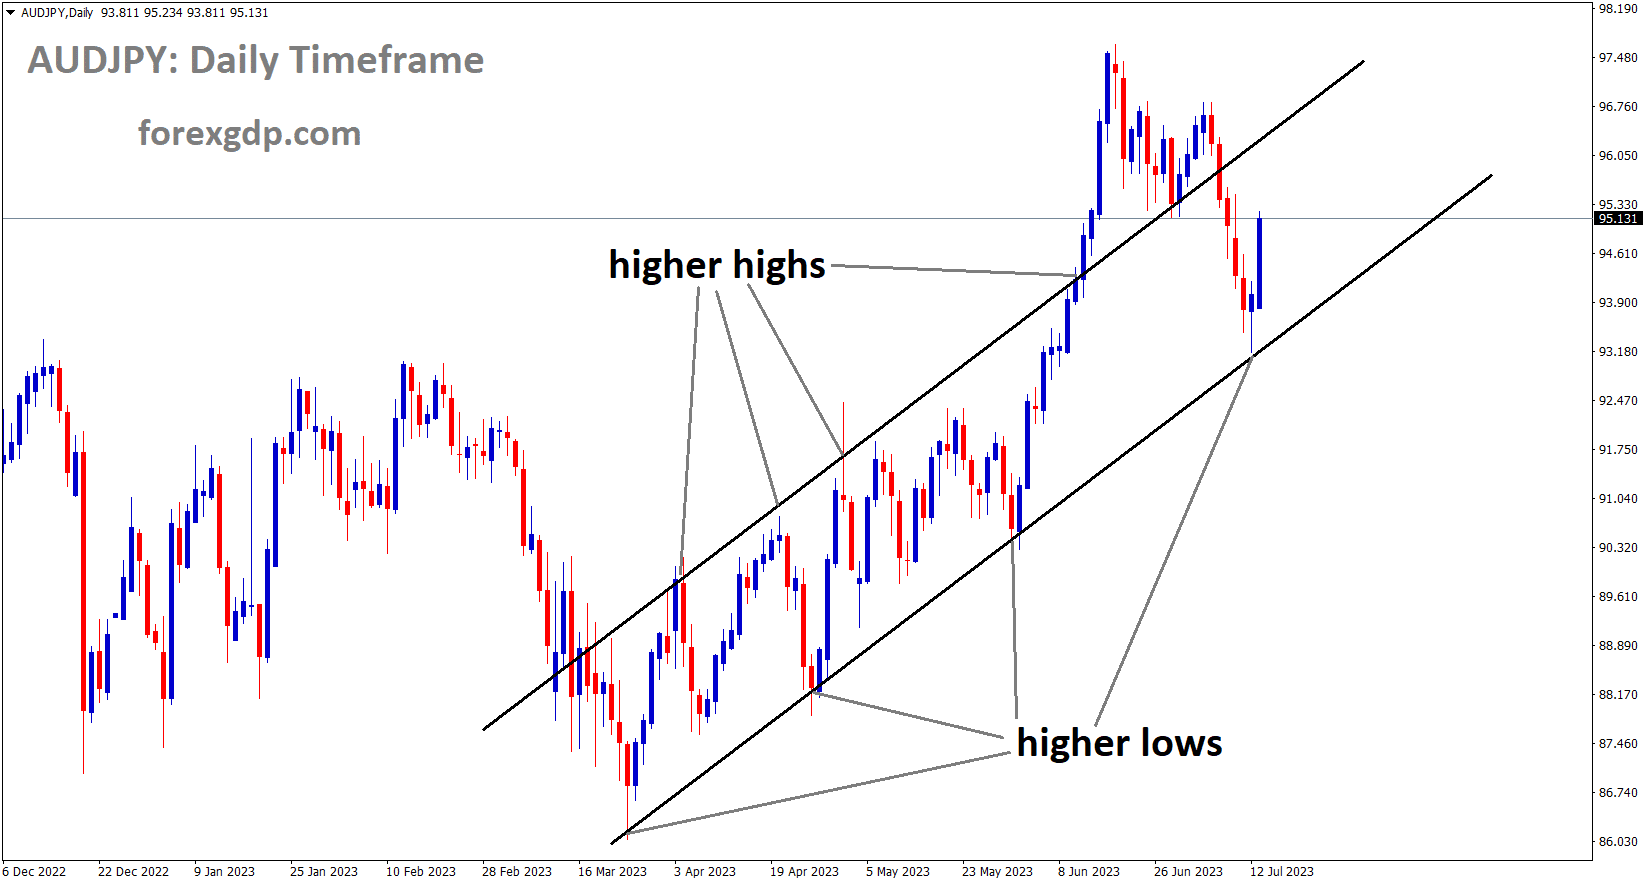 AUDJPY is moving in an Ascending channel and the market has rebounded from the higher low area of the channel